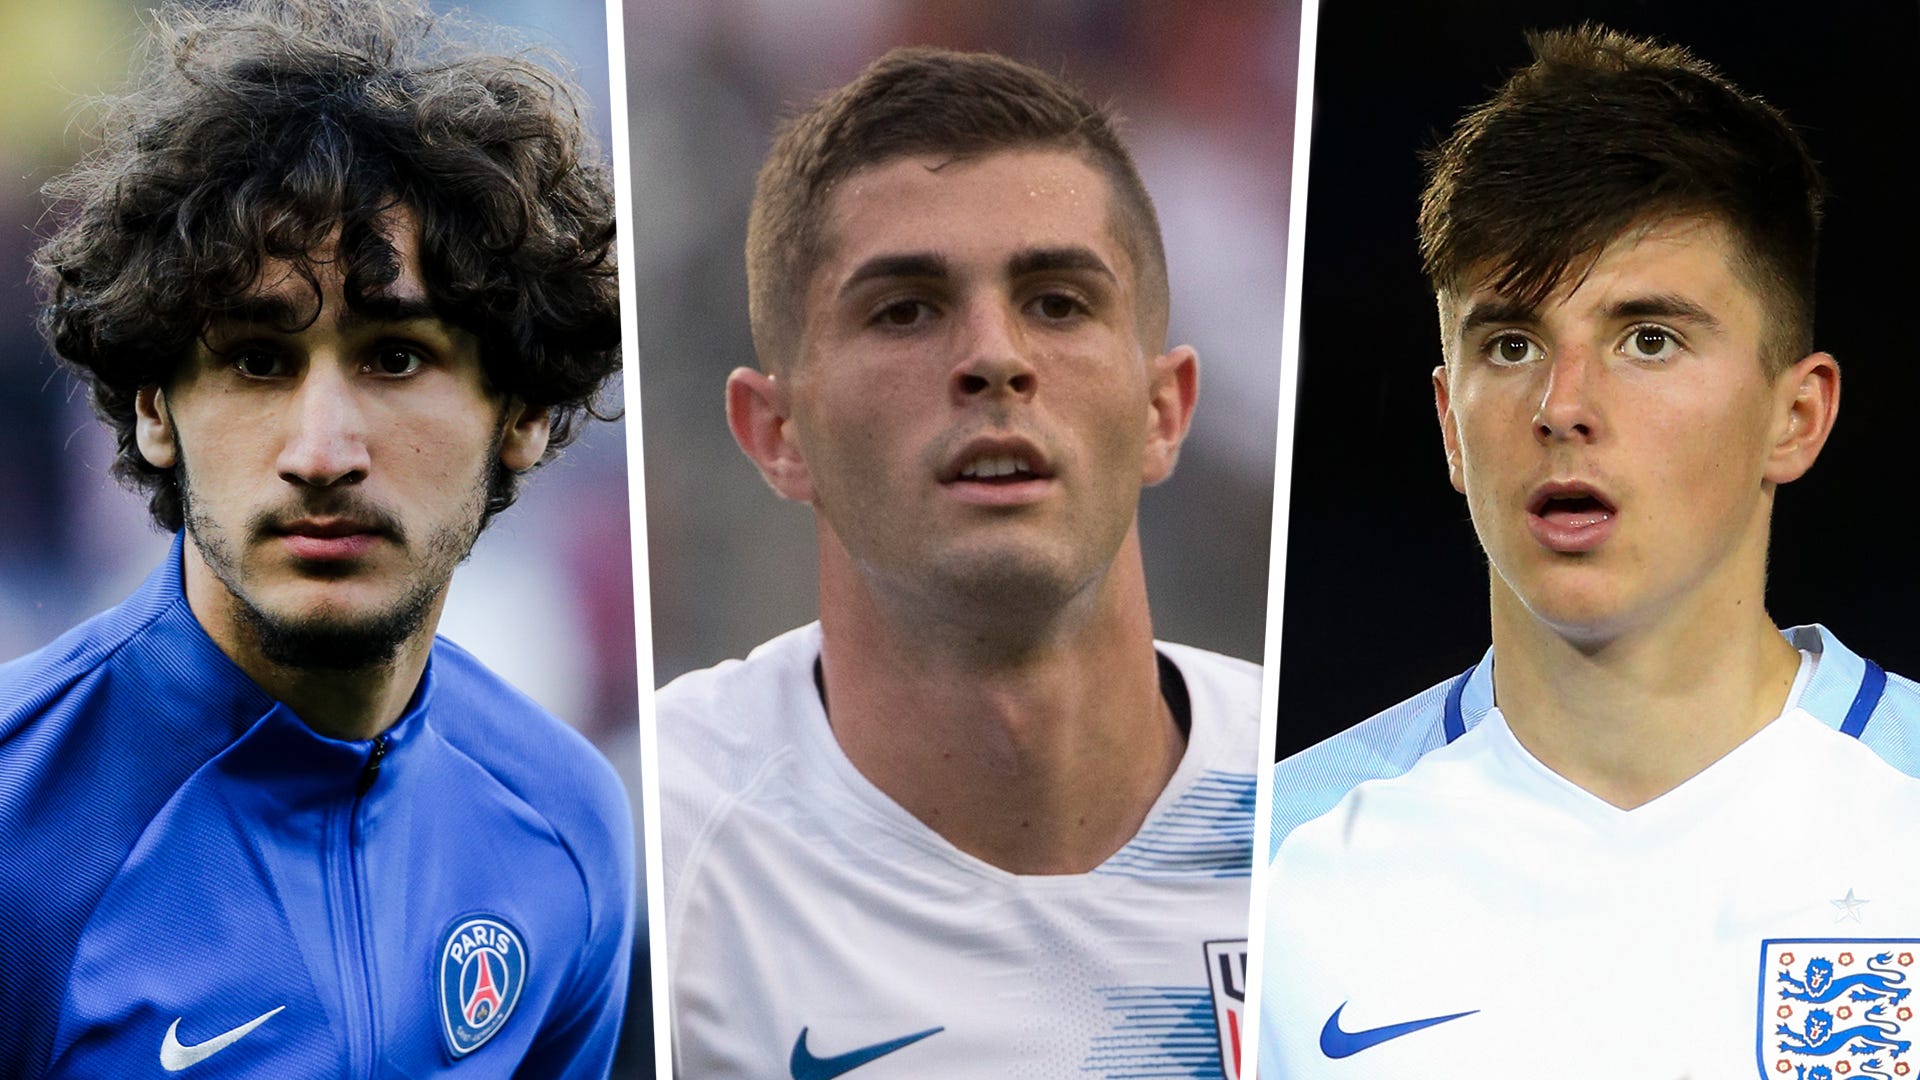 Who's Going To The World Cup? Here Are 8 Stars To Follow